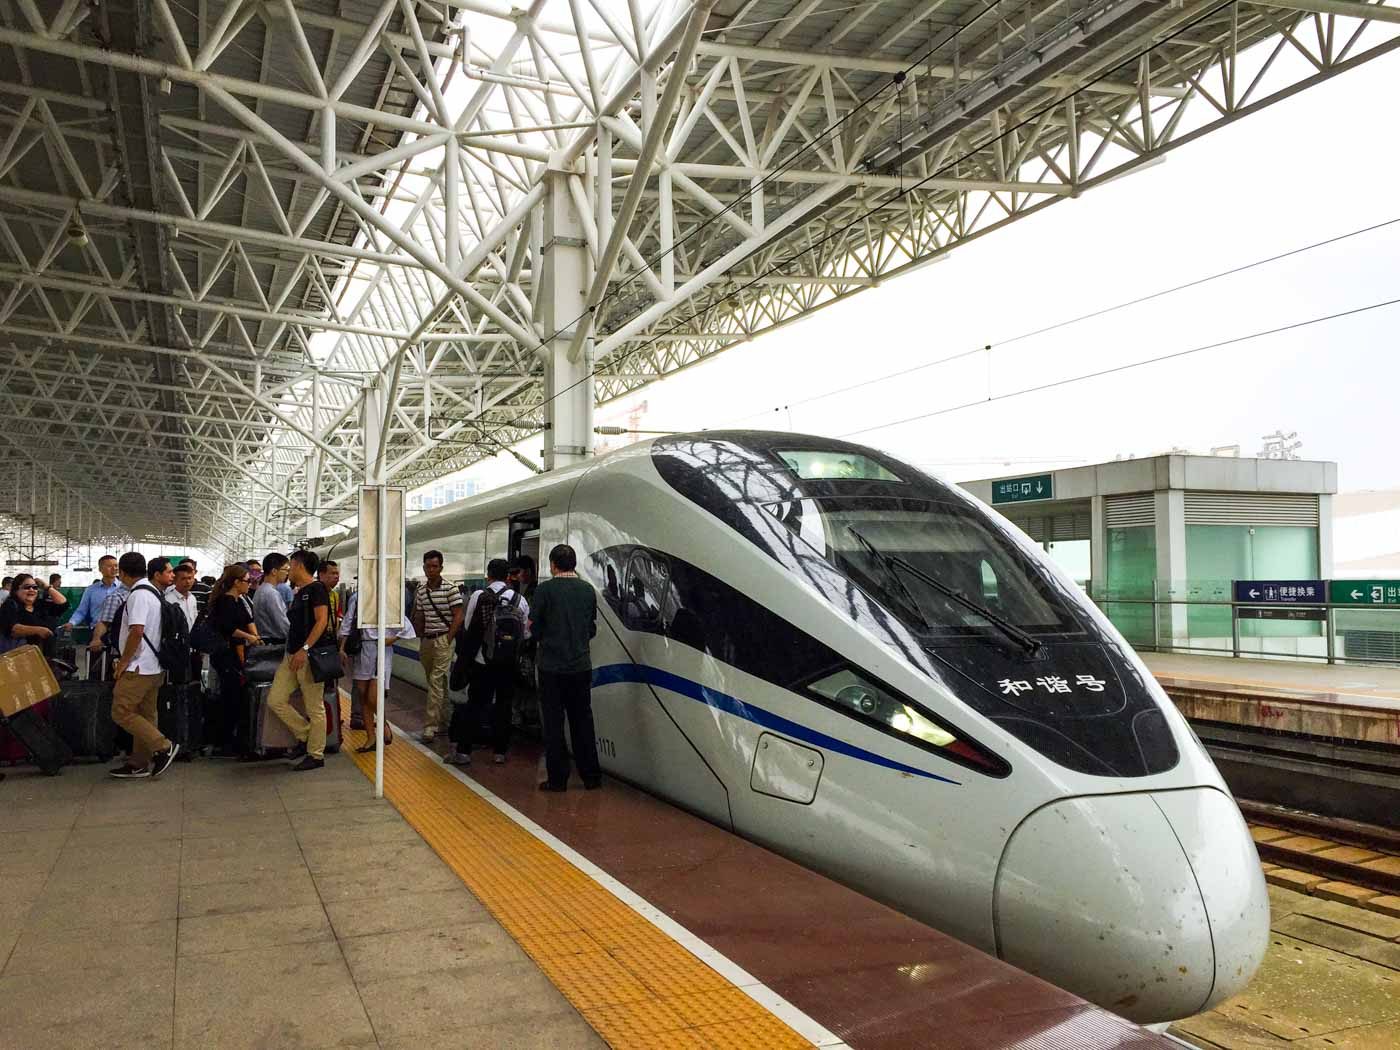 Will China help the Philippines achieve its railway dreams?